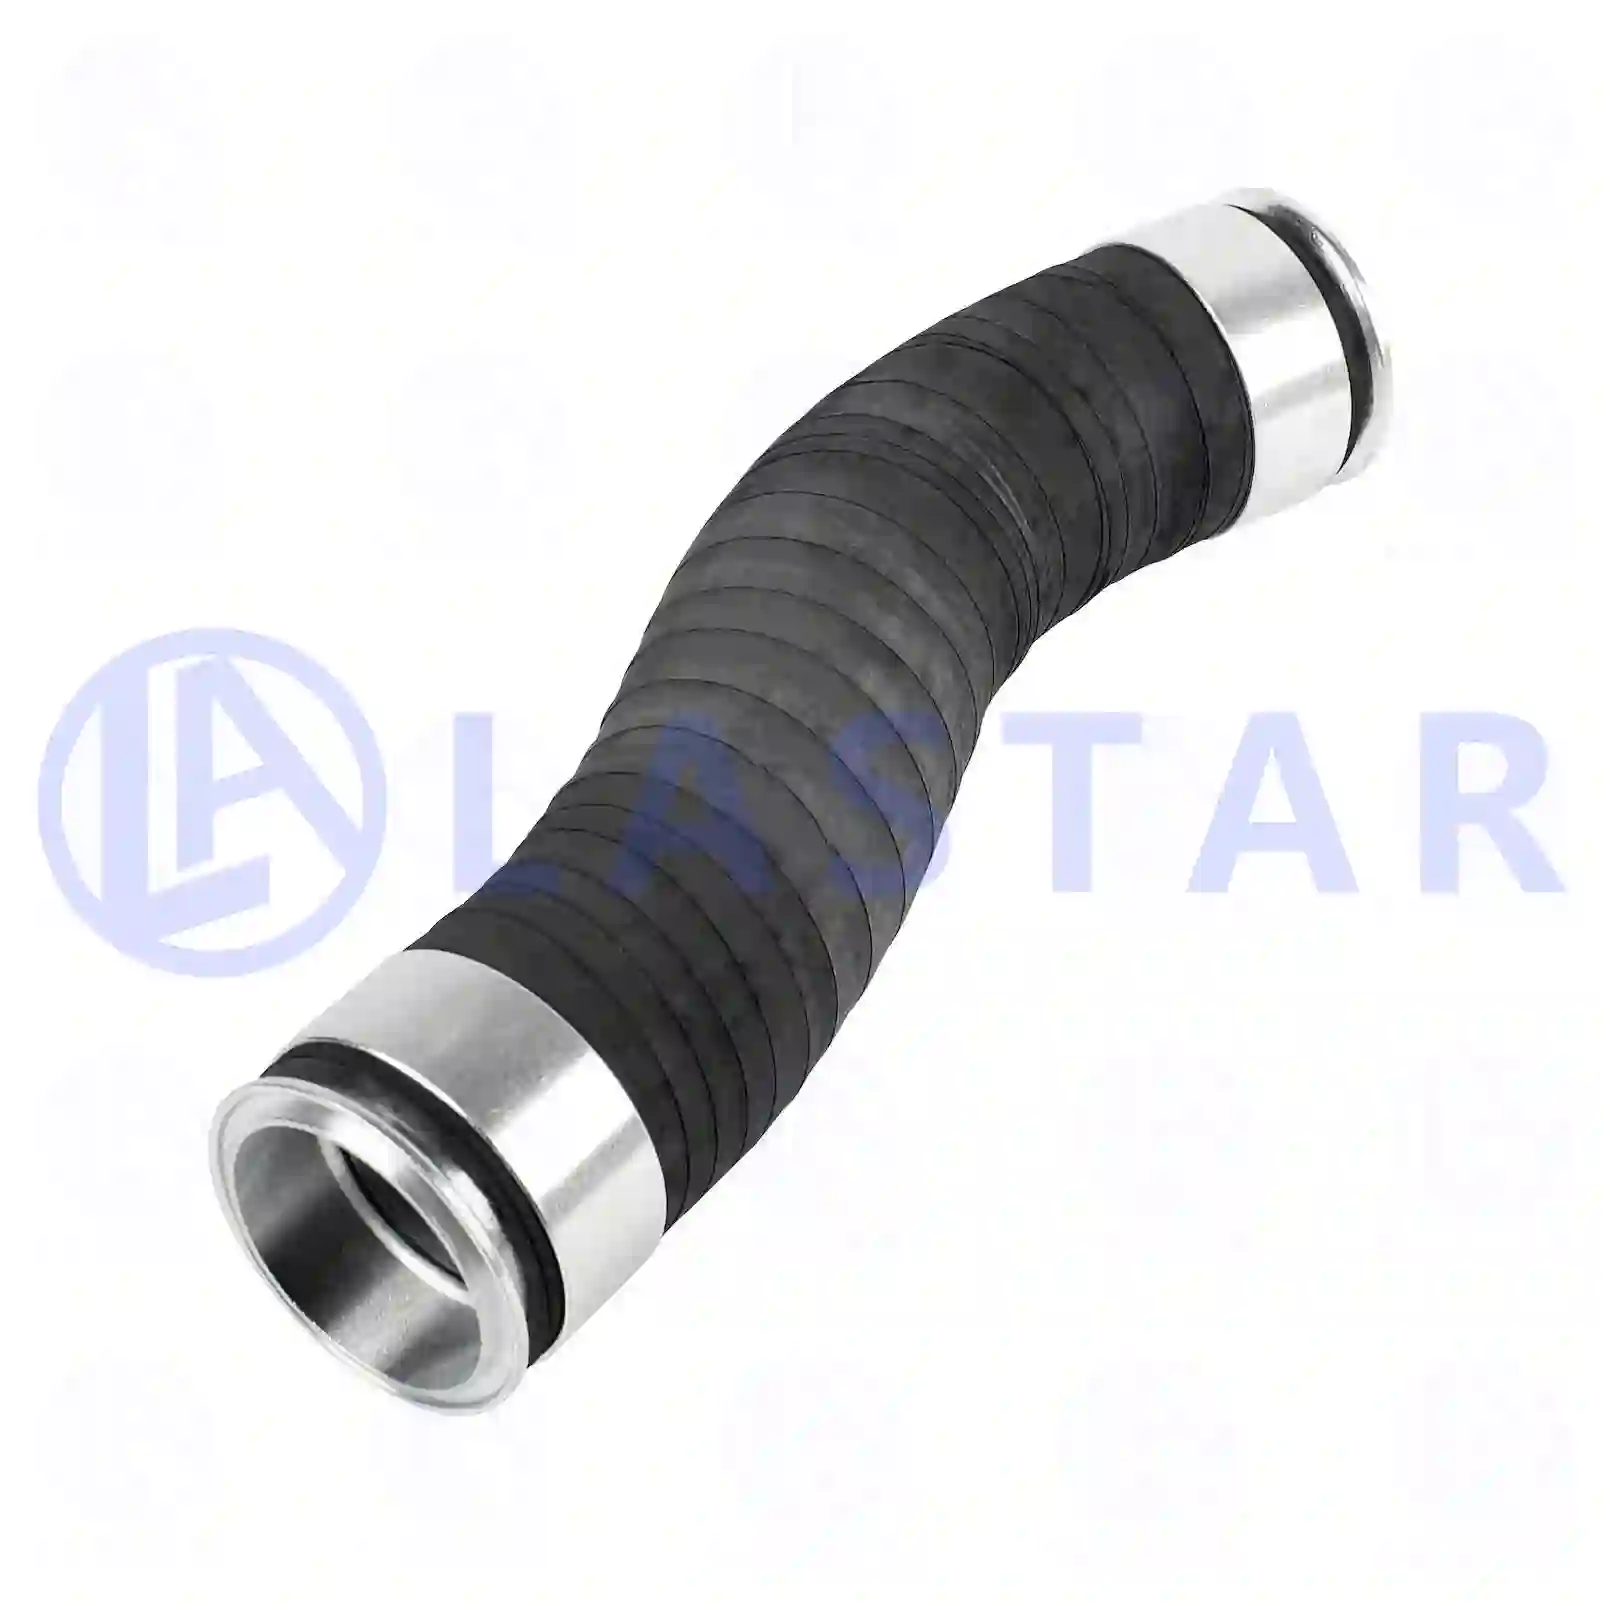 Charge air hose, 77709194, 1660277, 1676216 ||  77709194 Lastar Spare Part | Truck Spare Parts, Auotomotive Spare Parts Charge air hose, 77709194, 1660277, 1676216 ||  77709194 Lastar Spare Part | Truck Spare Parts, Auotomotive Spare Parts